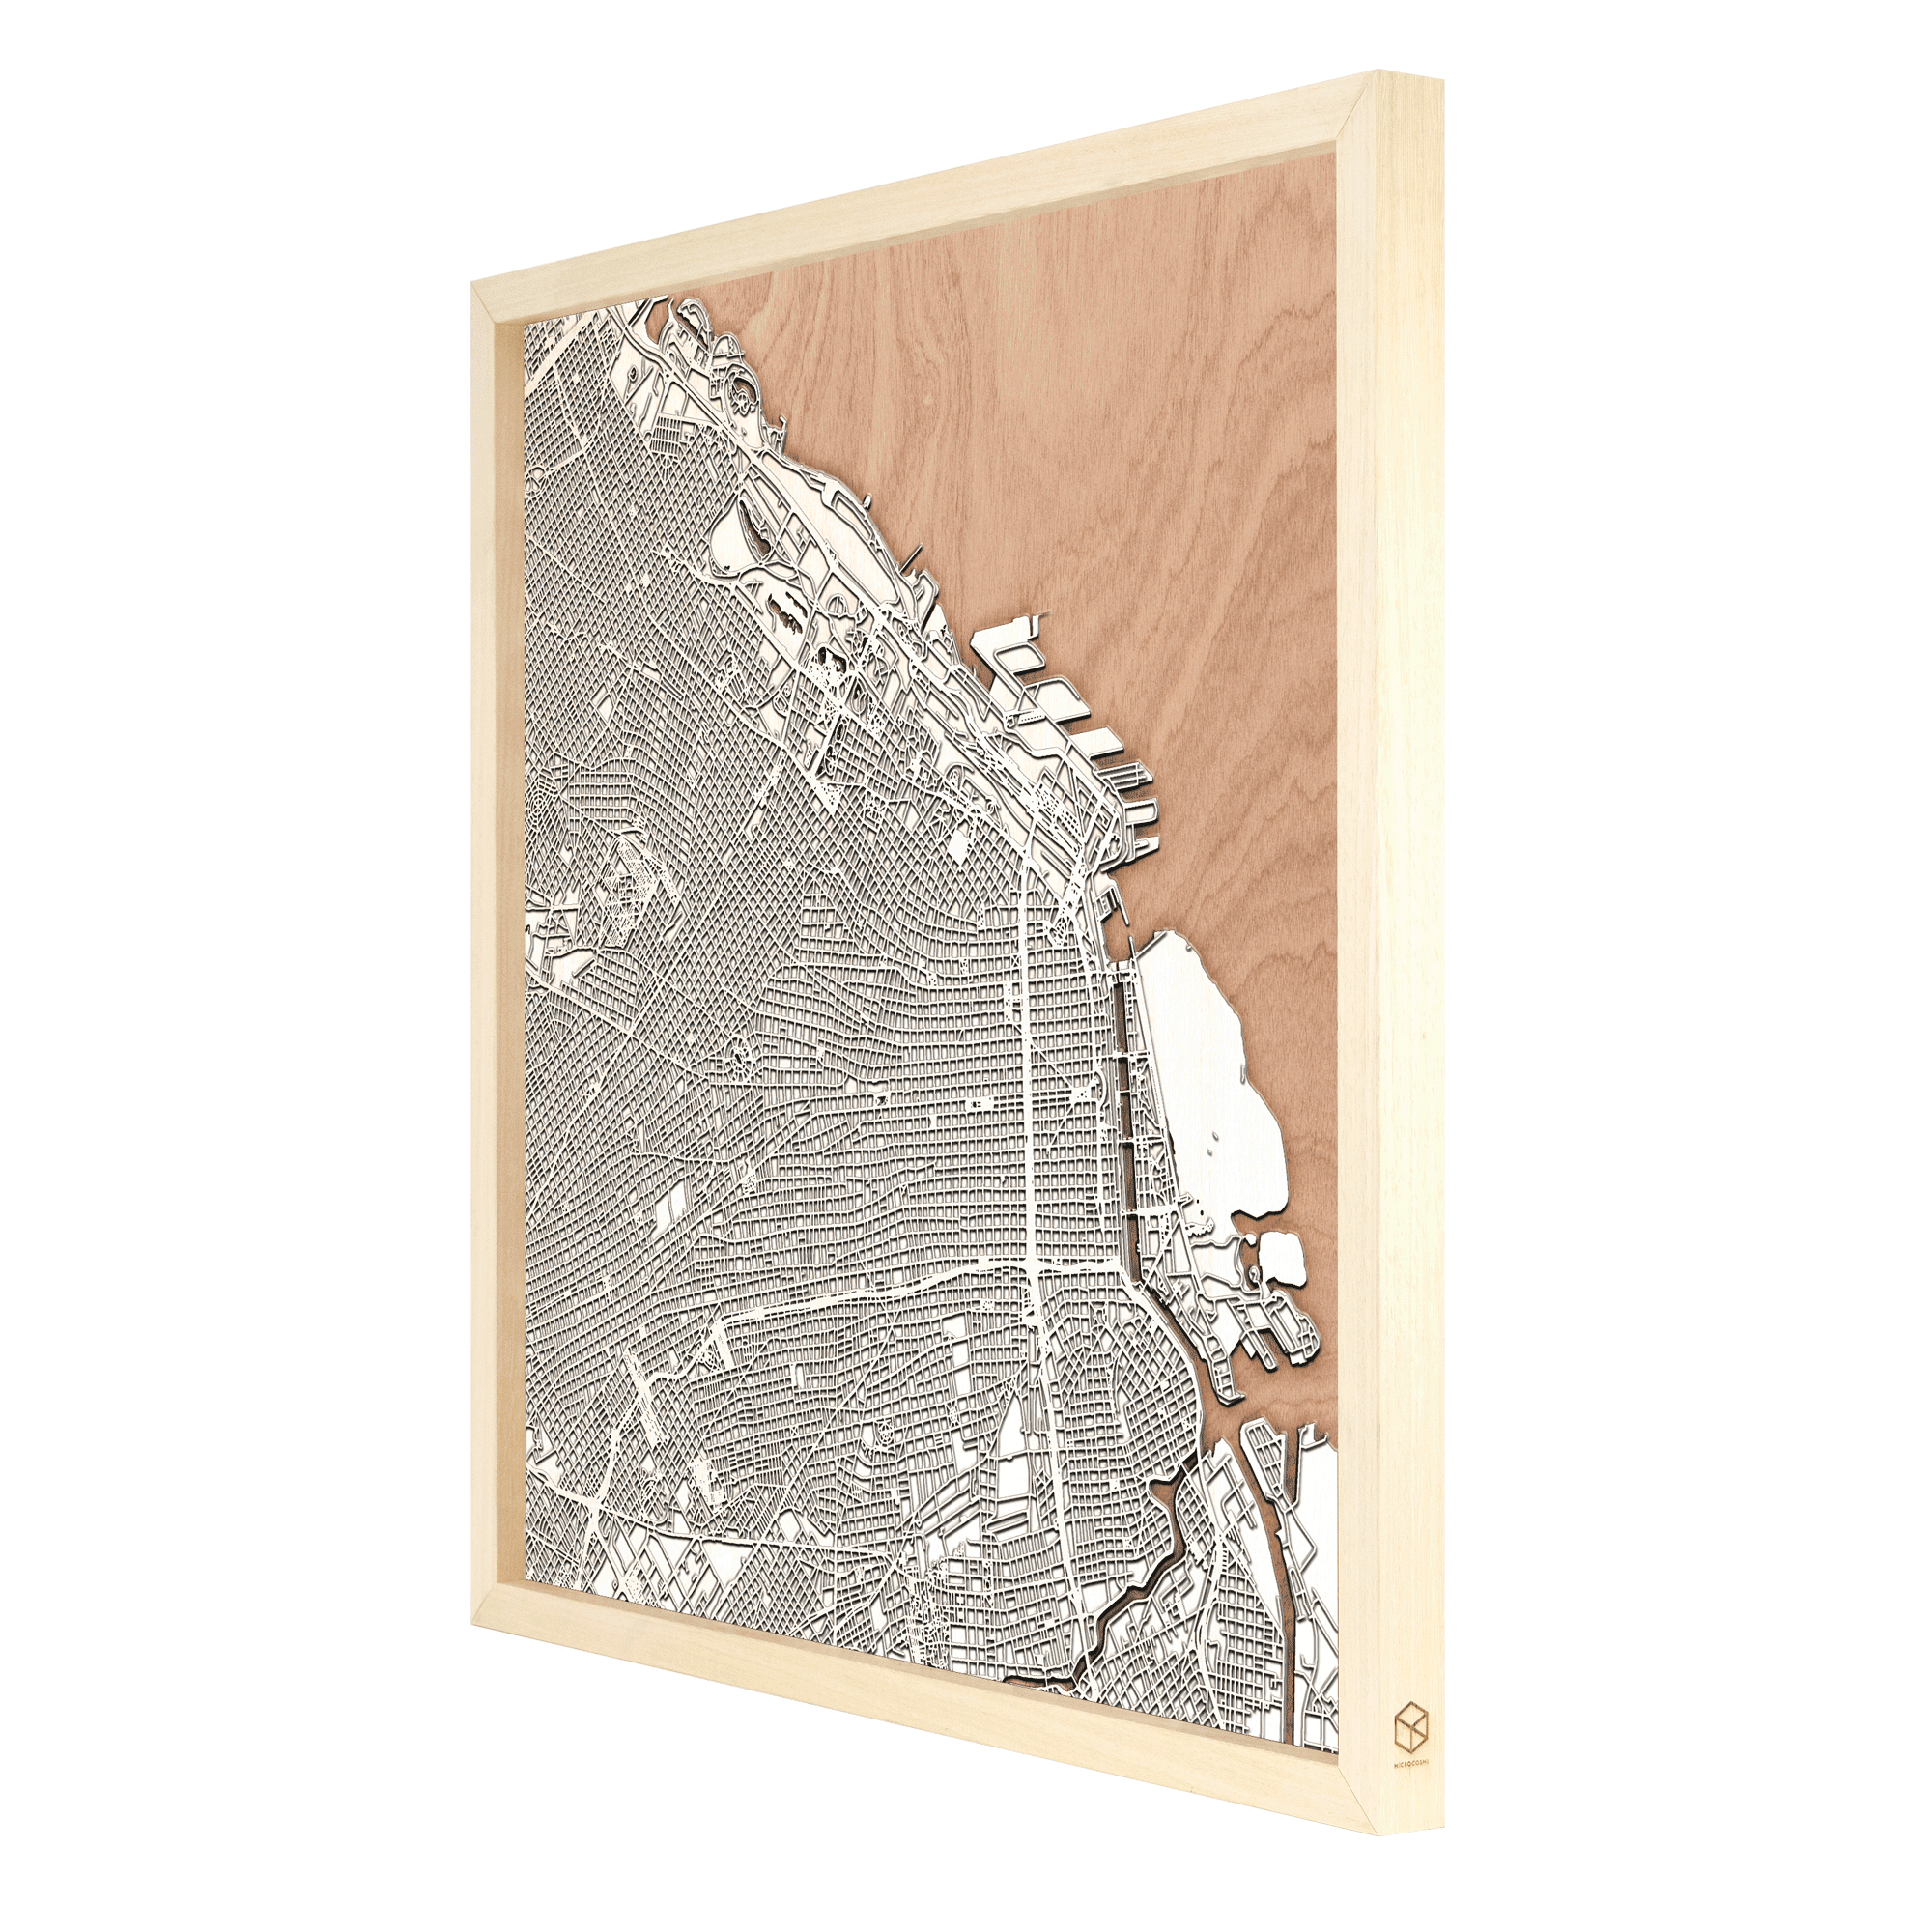 Buenos Aires laser cut city map timber detail